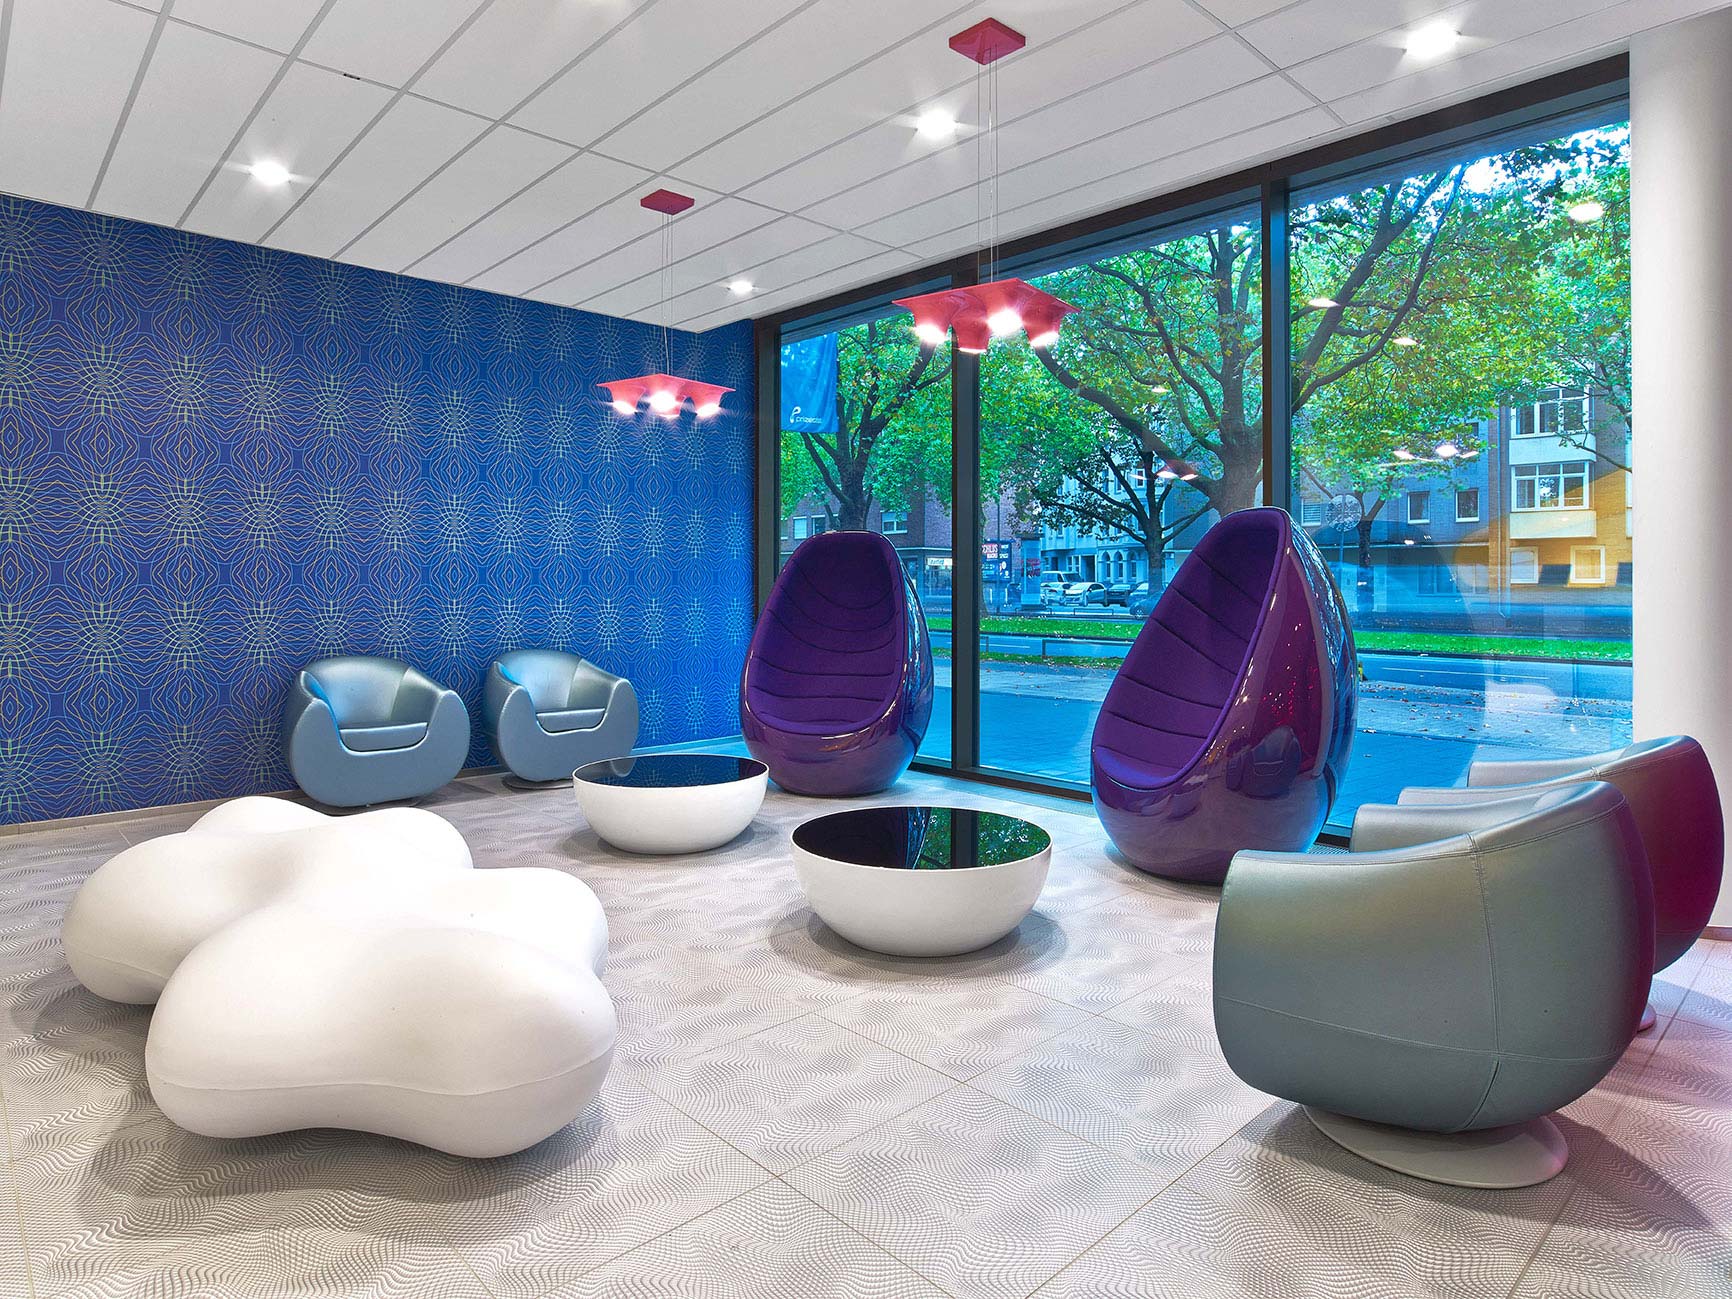 Hotel lounge in Hannover with purple egg chairs and other designer chairs